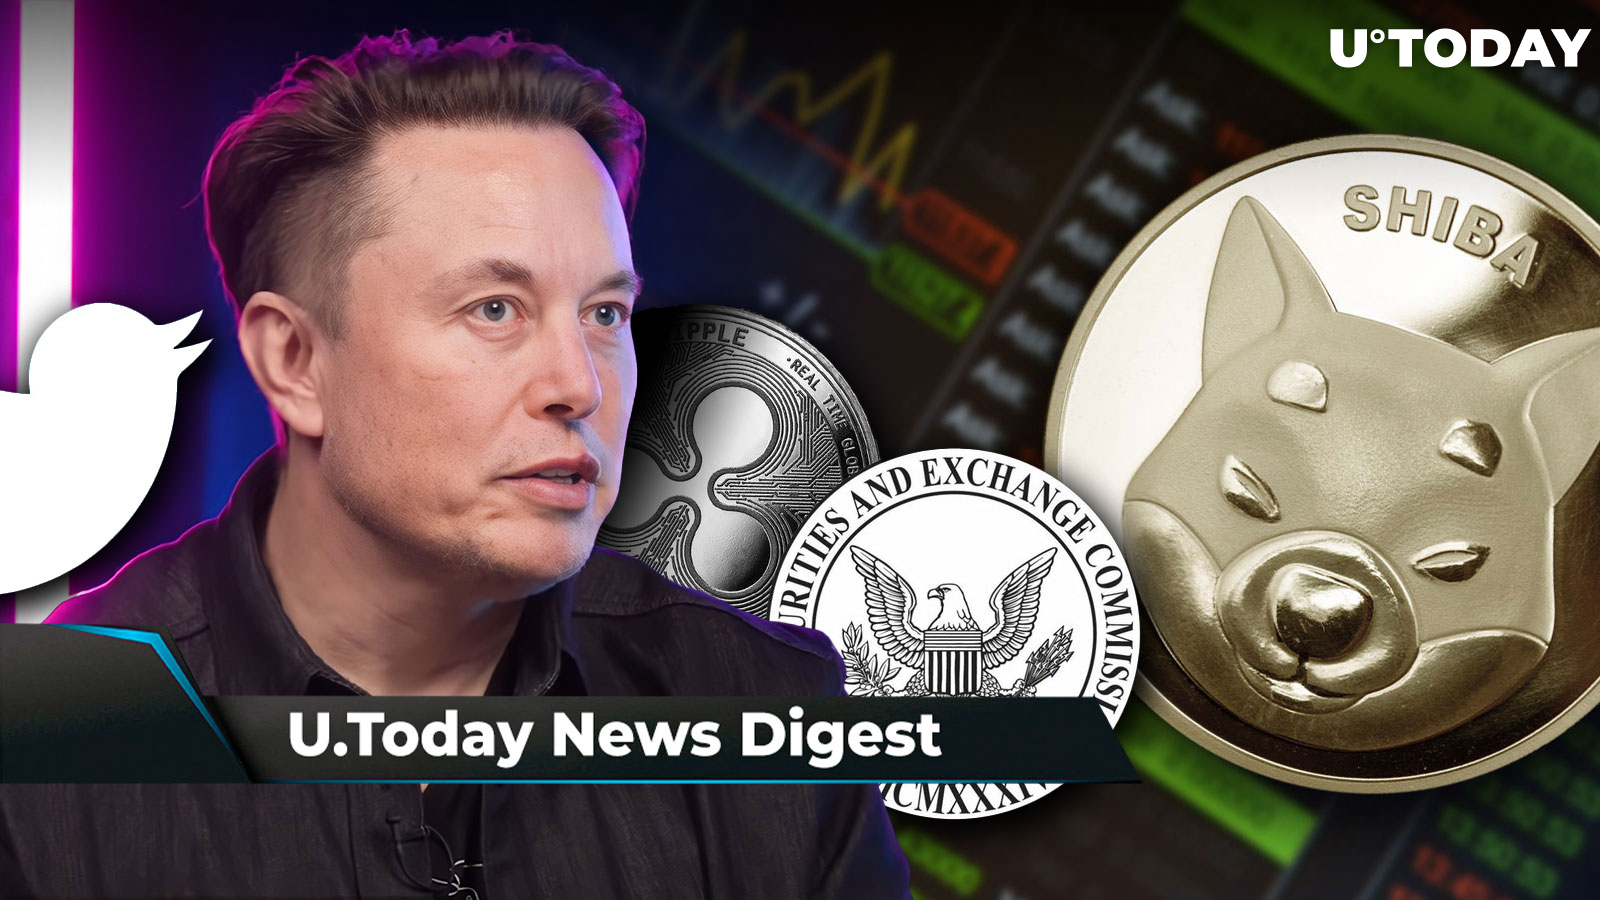 Elon Musk Shares Tweet About Ripple Beating SEC, SHIB's Shytoshi Kusama Issues Major Warning, Massive 563,571 XRP Shift Sparks Speculation: Crypto News Digest by U.Today